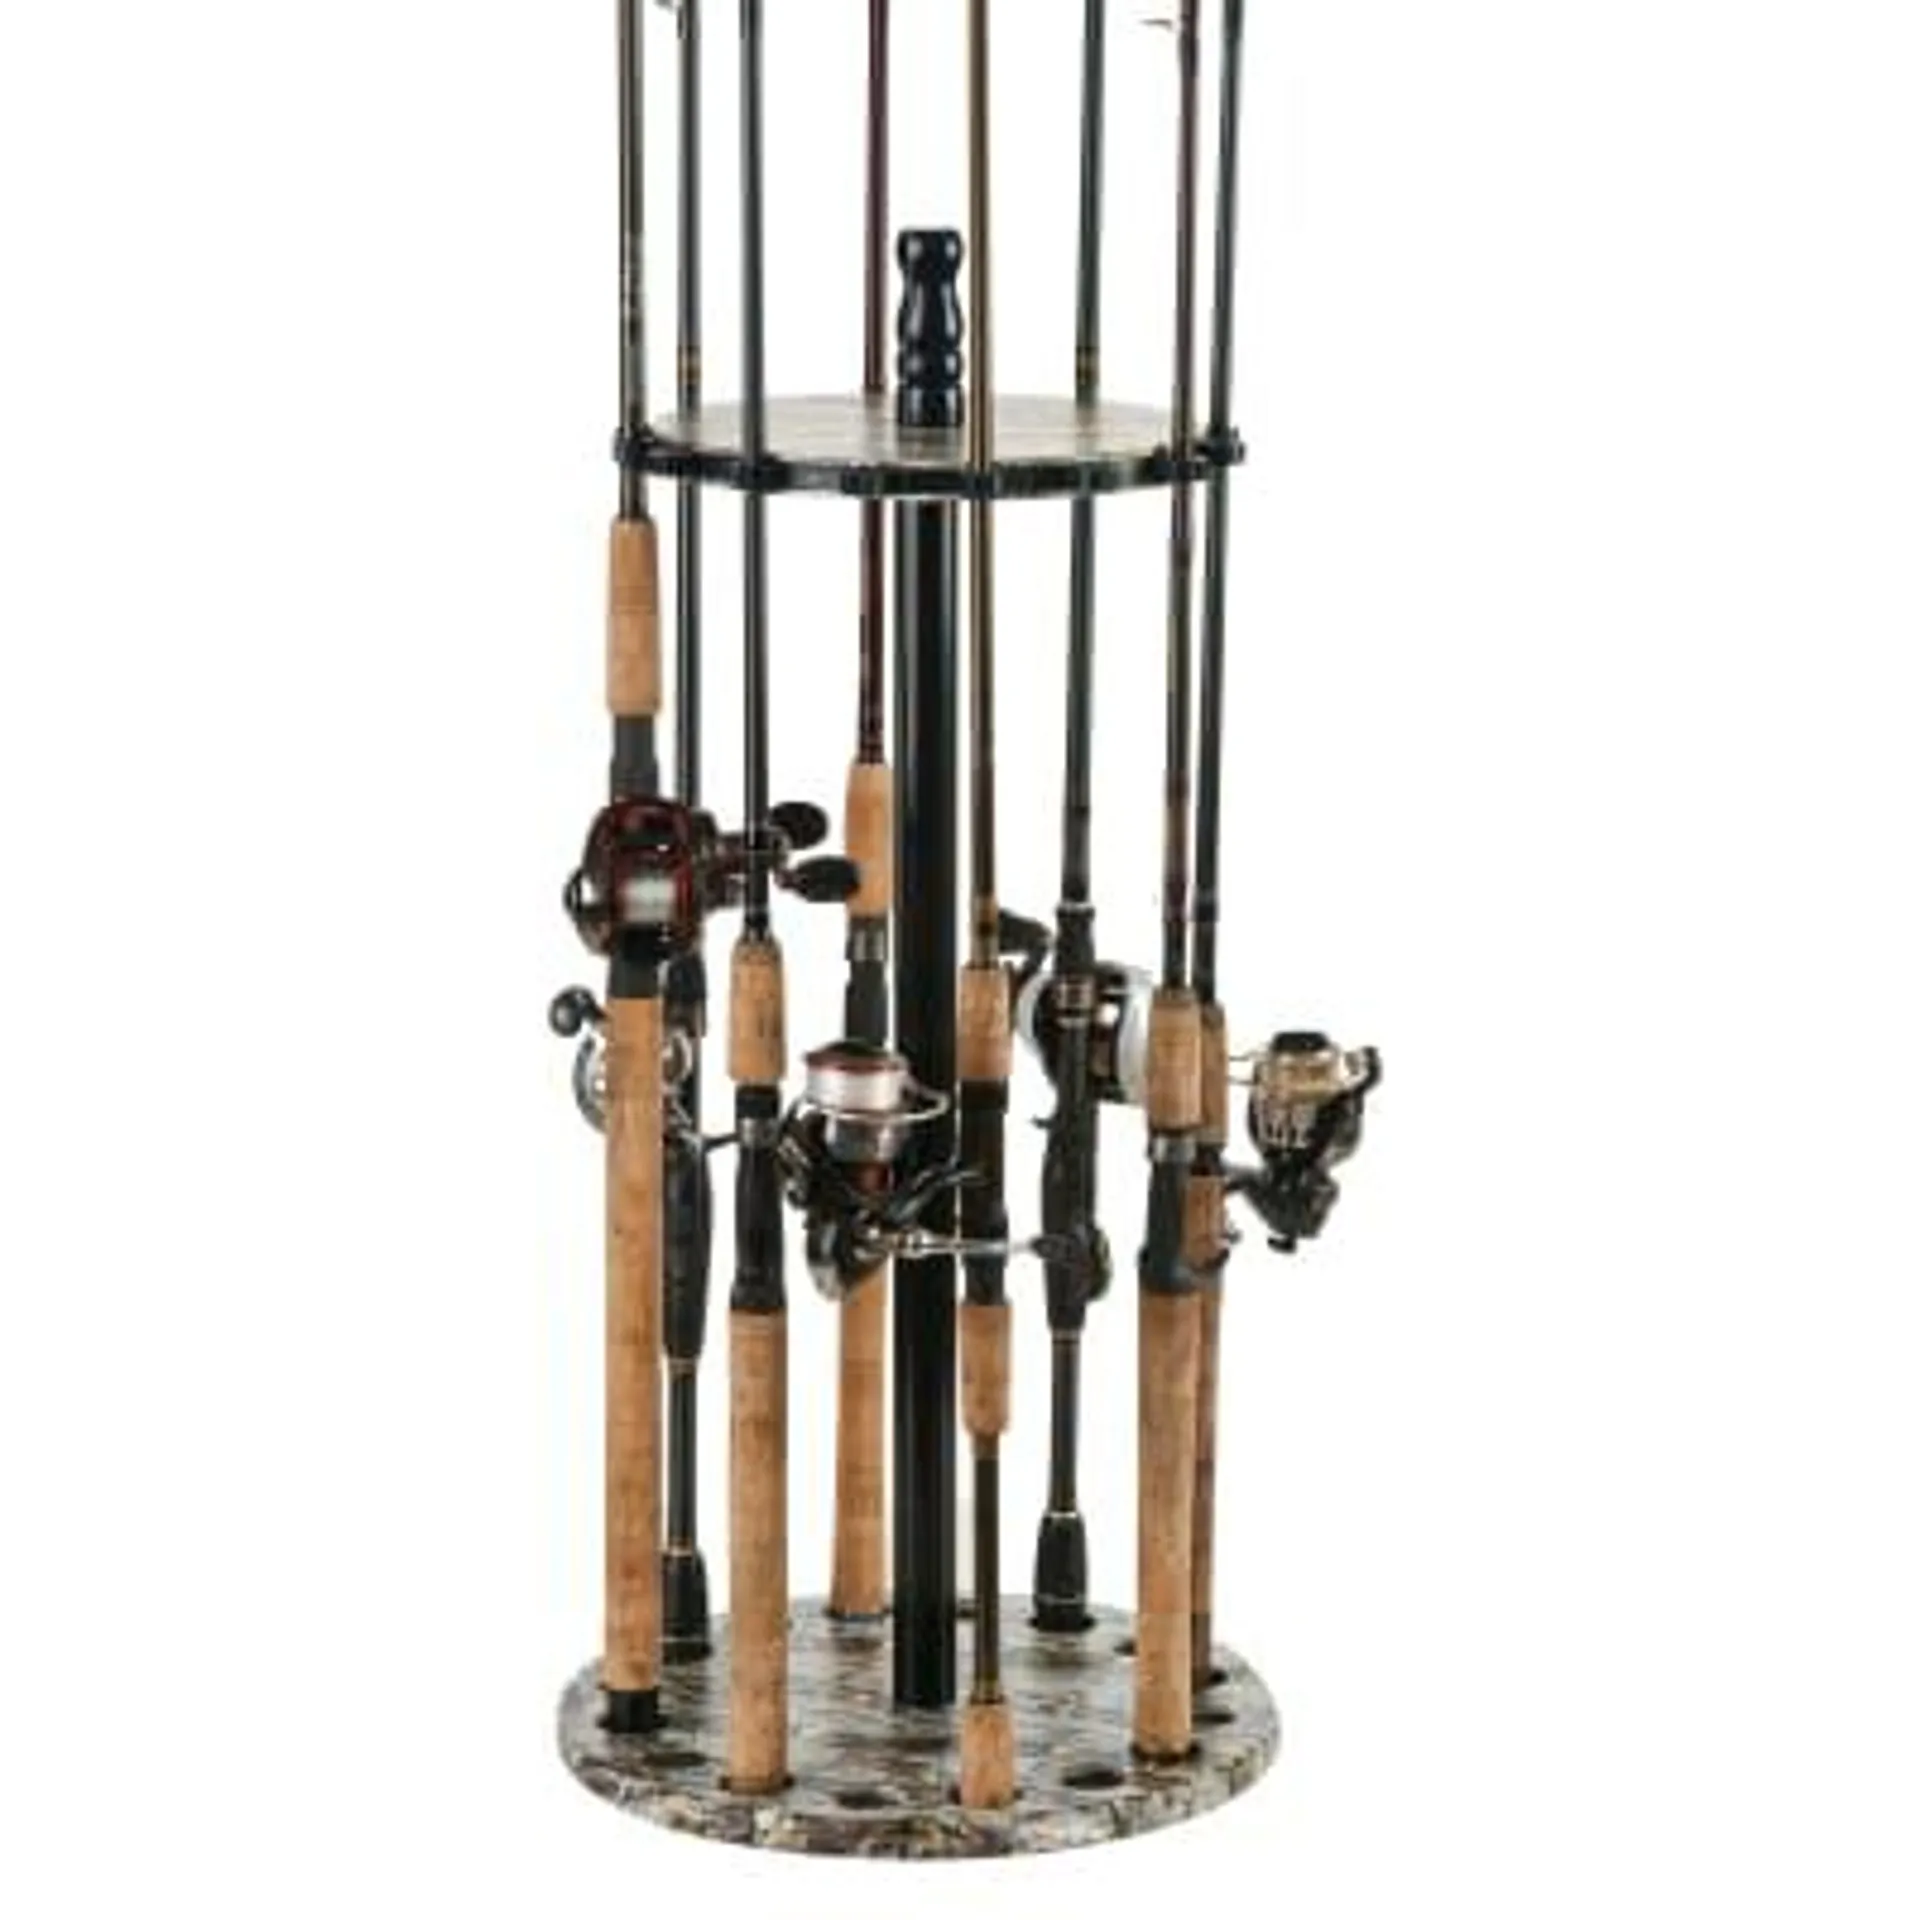 Old Cedar Outfitter's Camo Round Floor Fishing Rod Rack